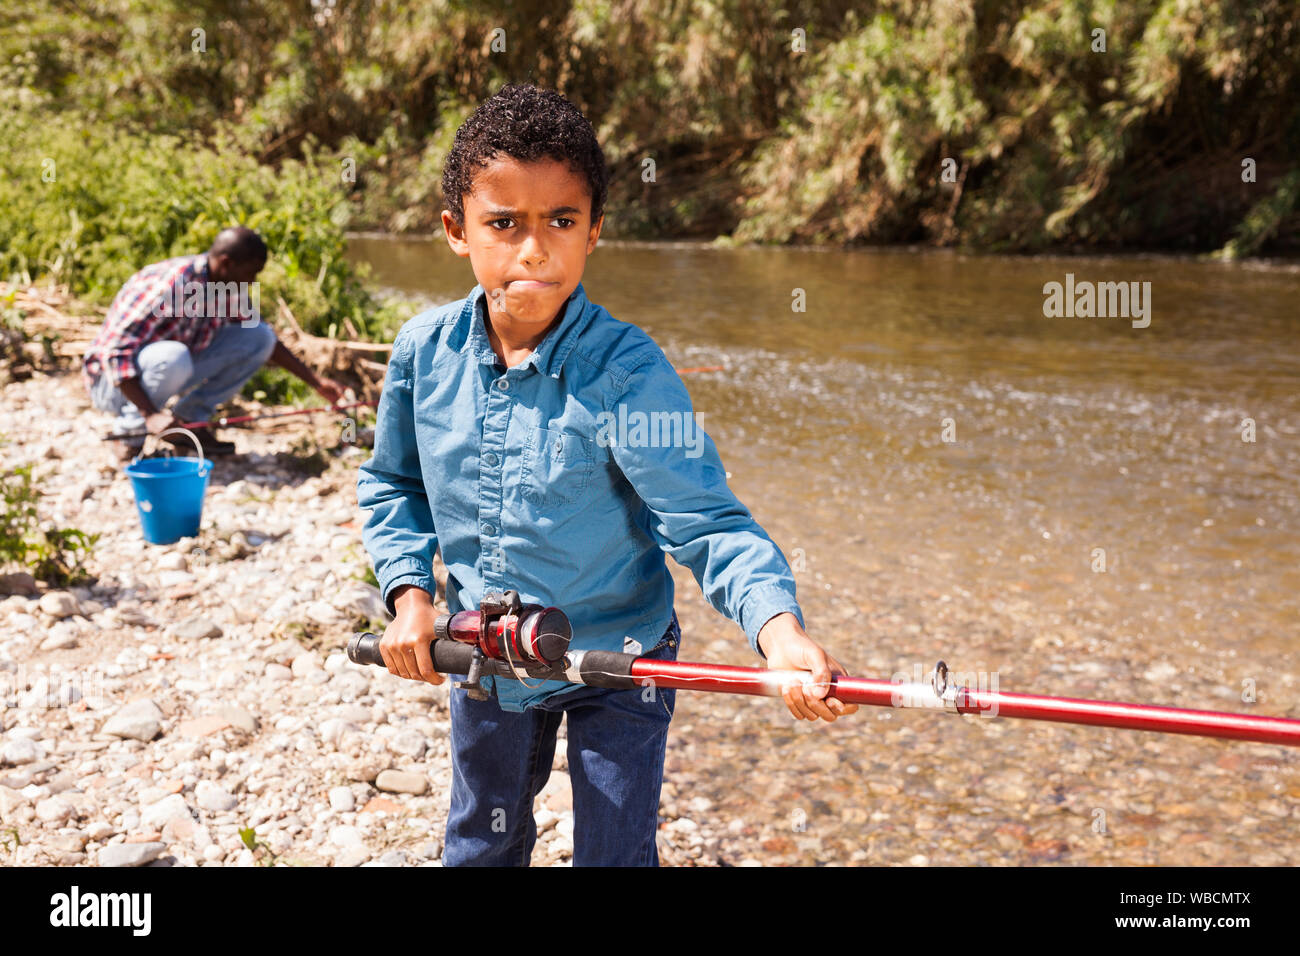 Little African boy fishing with his father and pulling fish Stock Photo